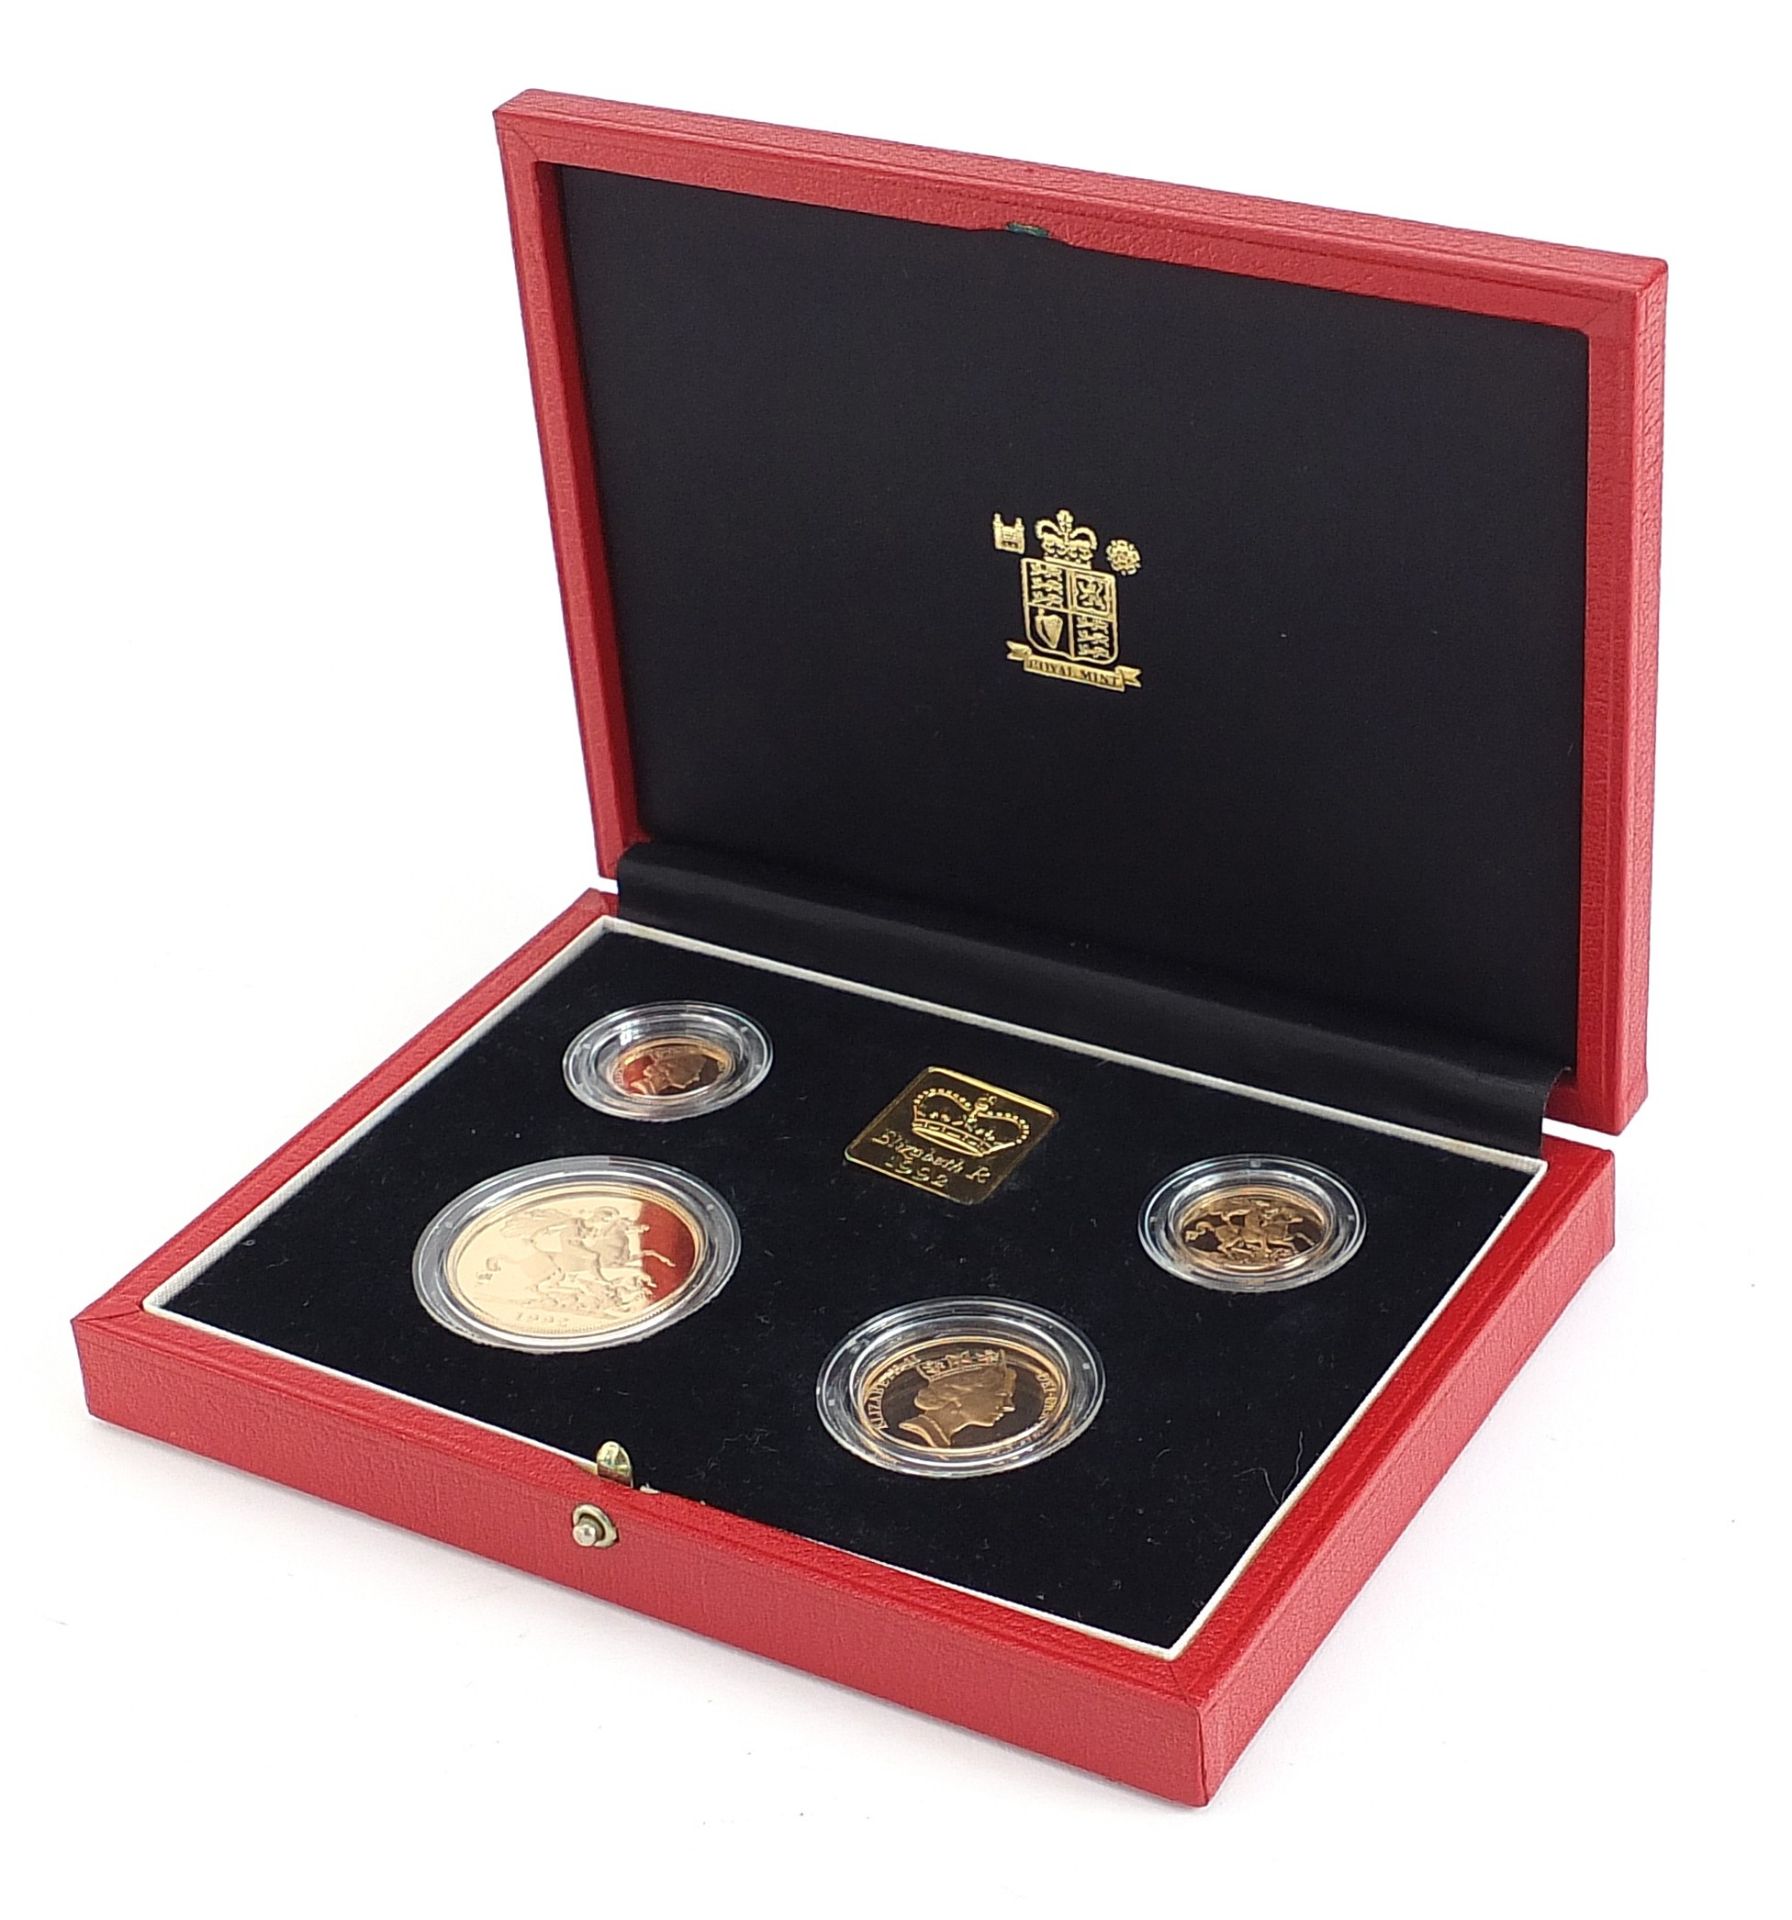 1992 United Kingdom Gold Proof Sovereign Four Coin Collection comprising half sovereign, sovereign, - Image 2 of 4